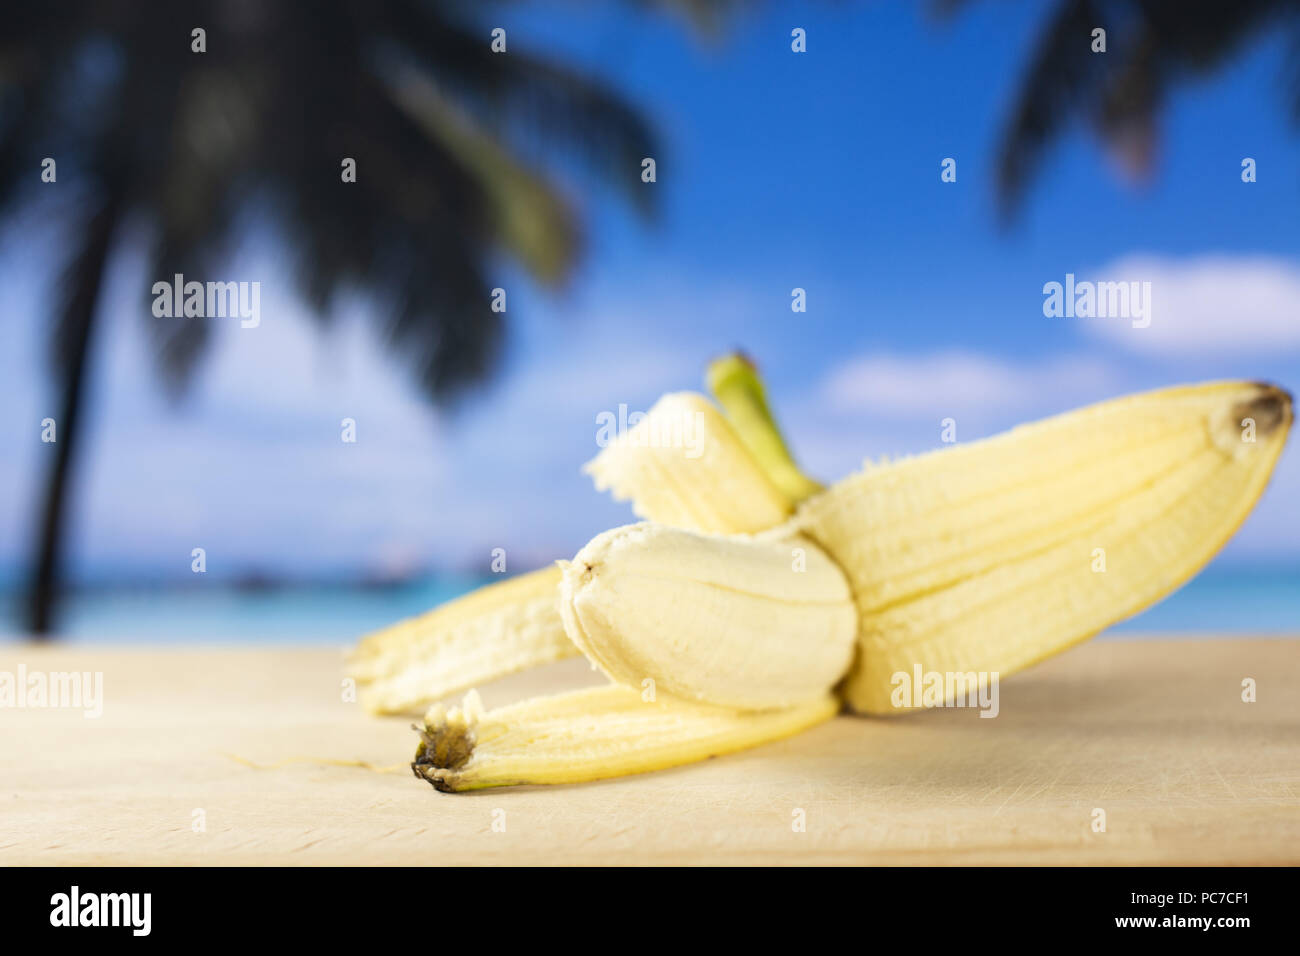 One whole fresh yellow banana opened like a plane with palm trees on the beach in background Stock Photo